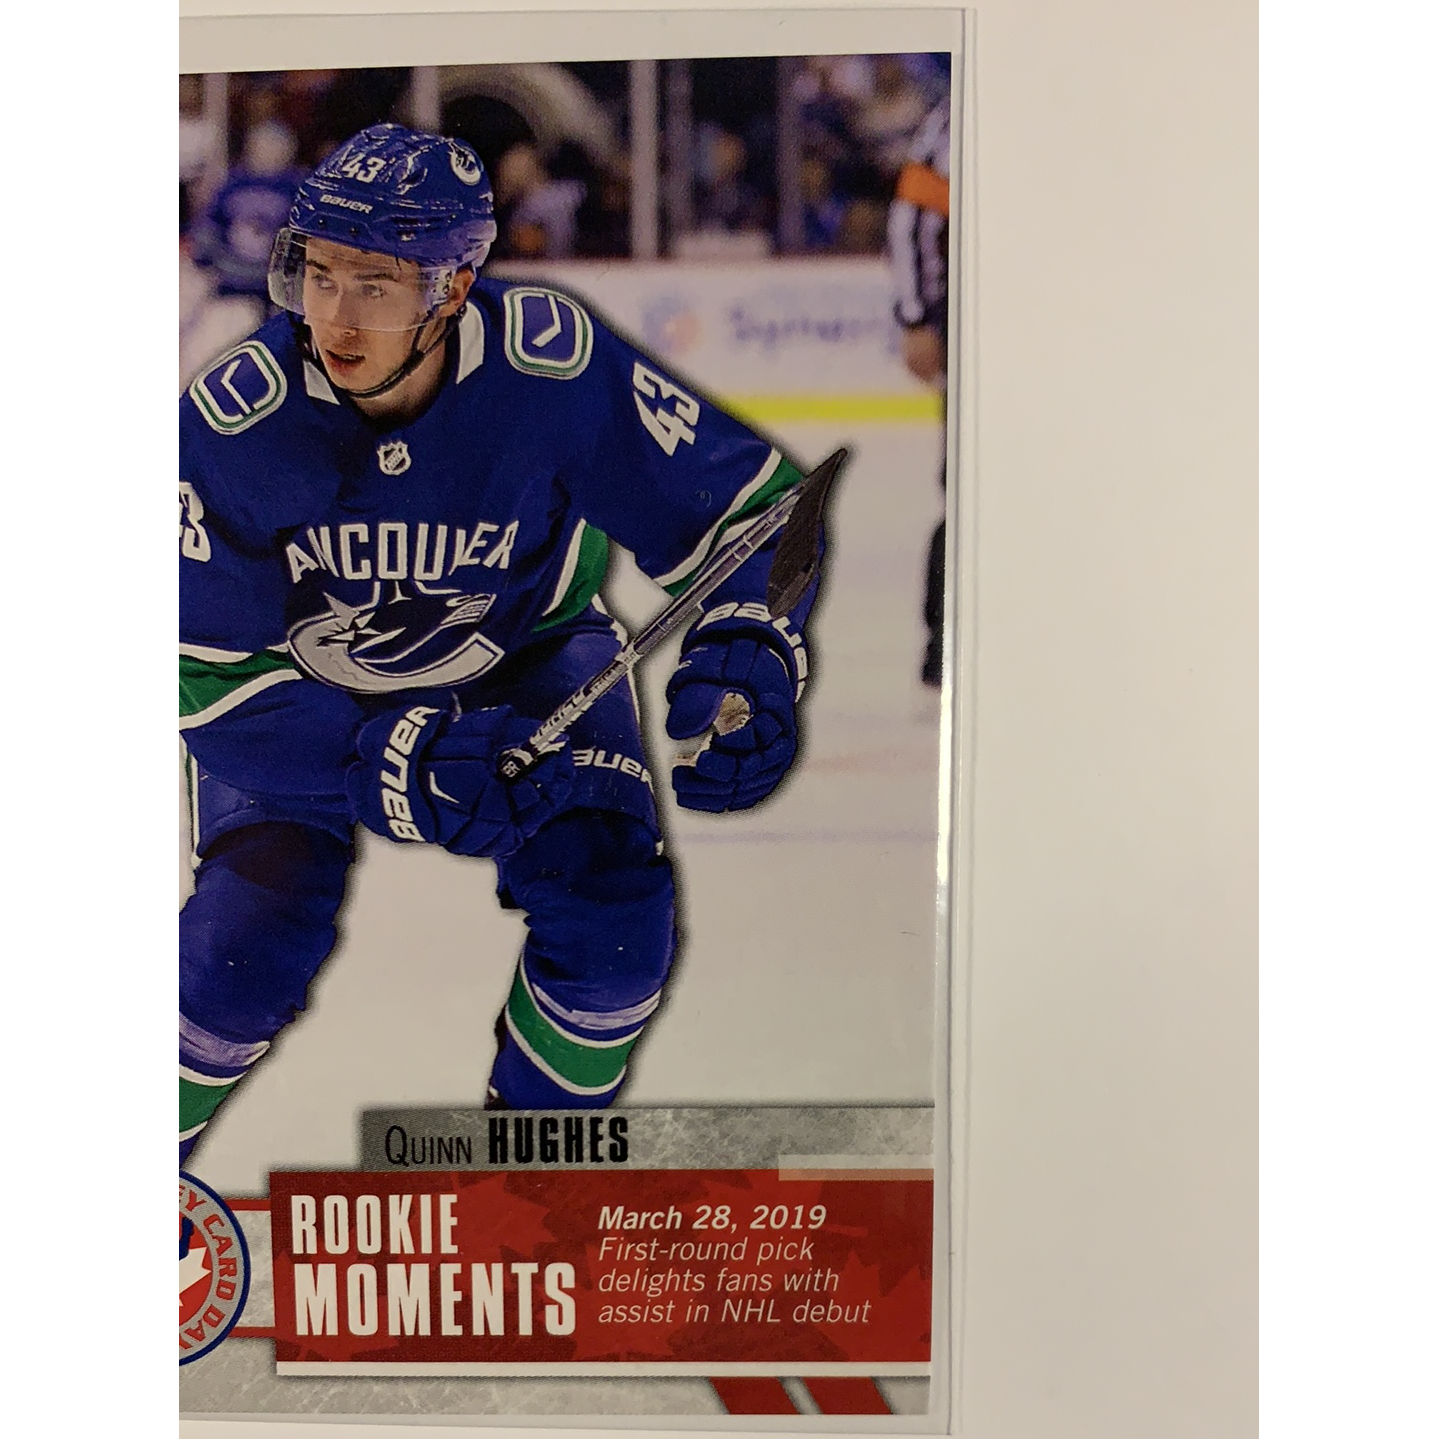  2019-20 Upper Deck Day In Canada Quinn Hughes Rookie Moments  Local Legends Cards & Collectibles